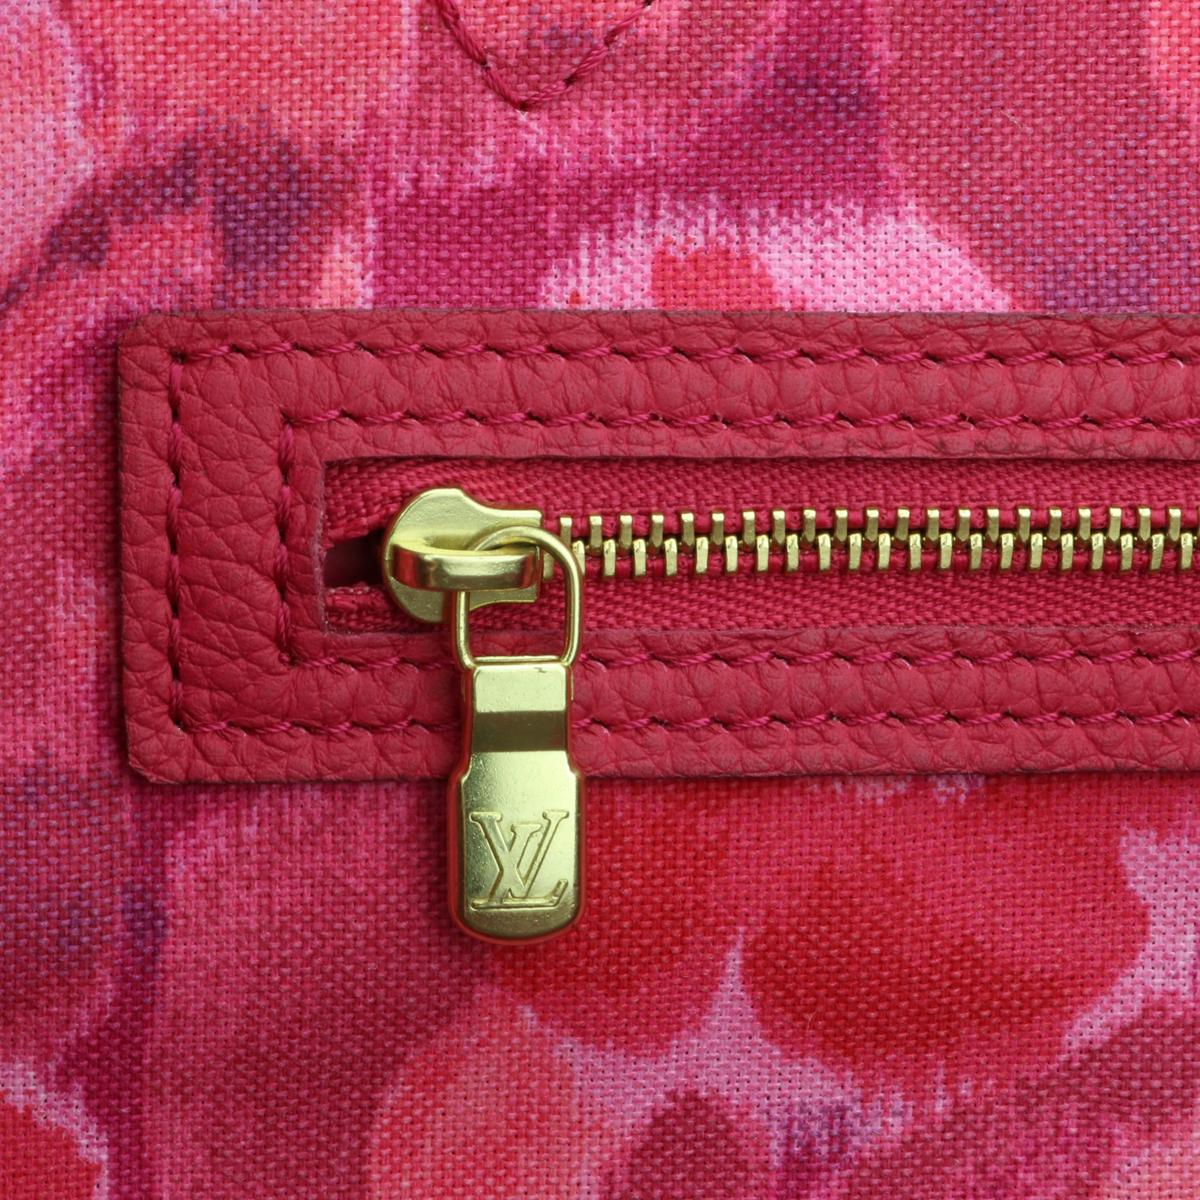 Louis Vuitton Neverfull MM Ikat Bag in Monogram Fuchsia 2013 Limited Edition For Sale 13